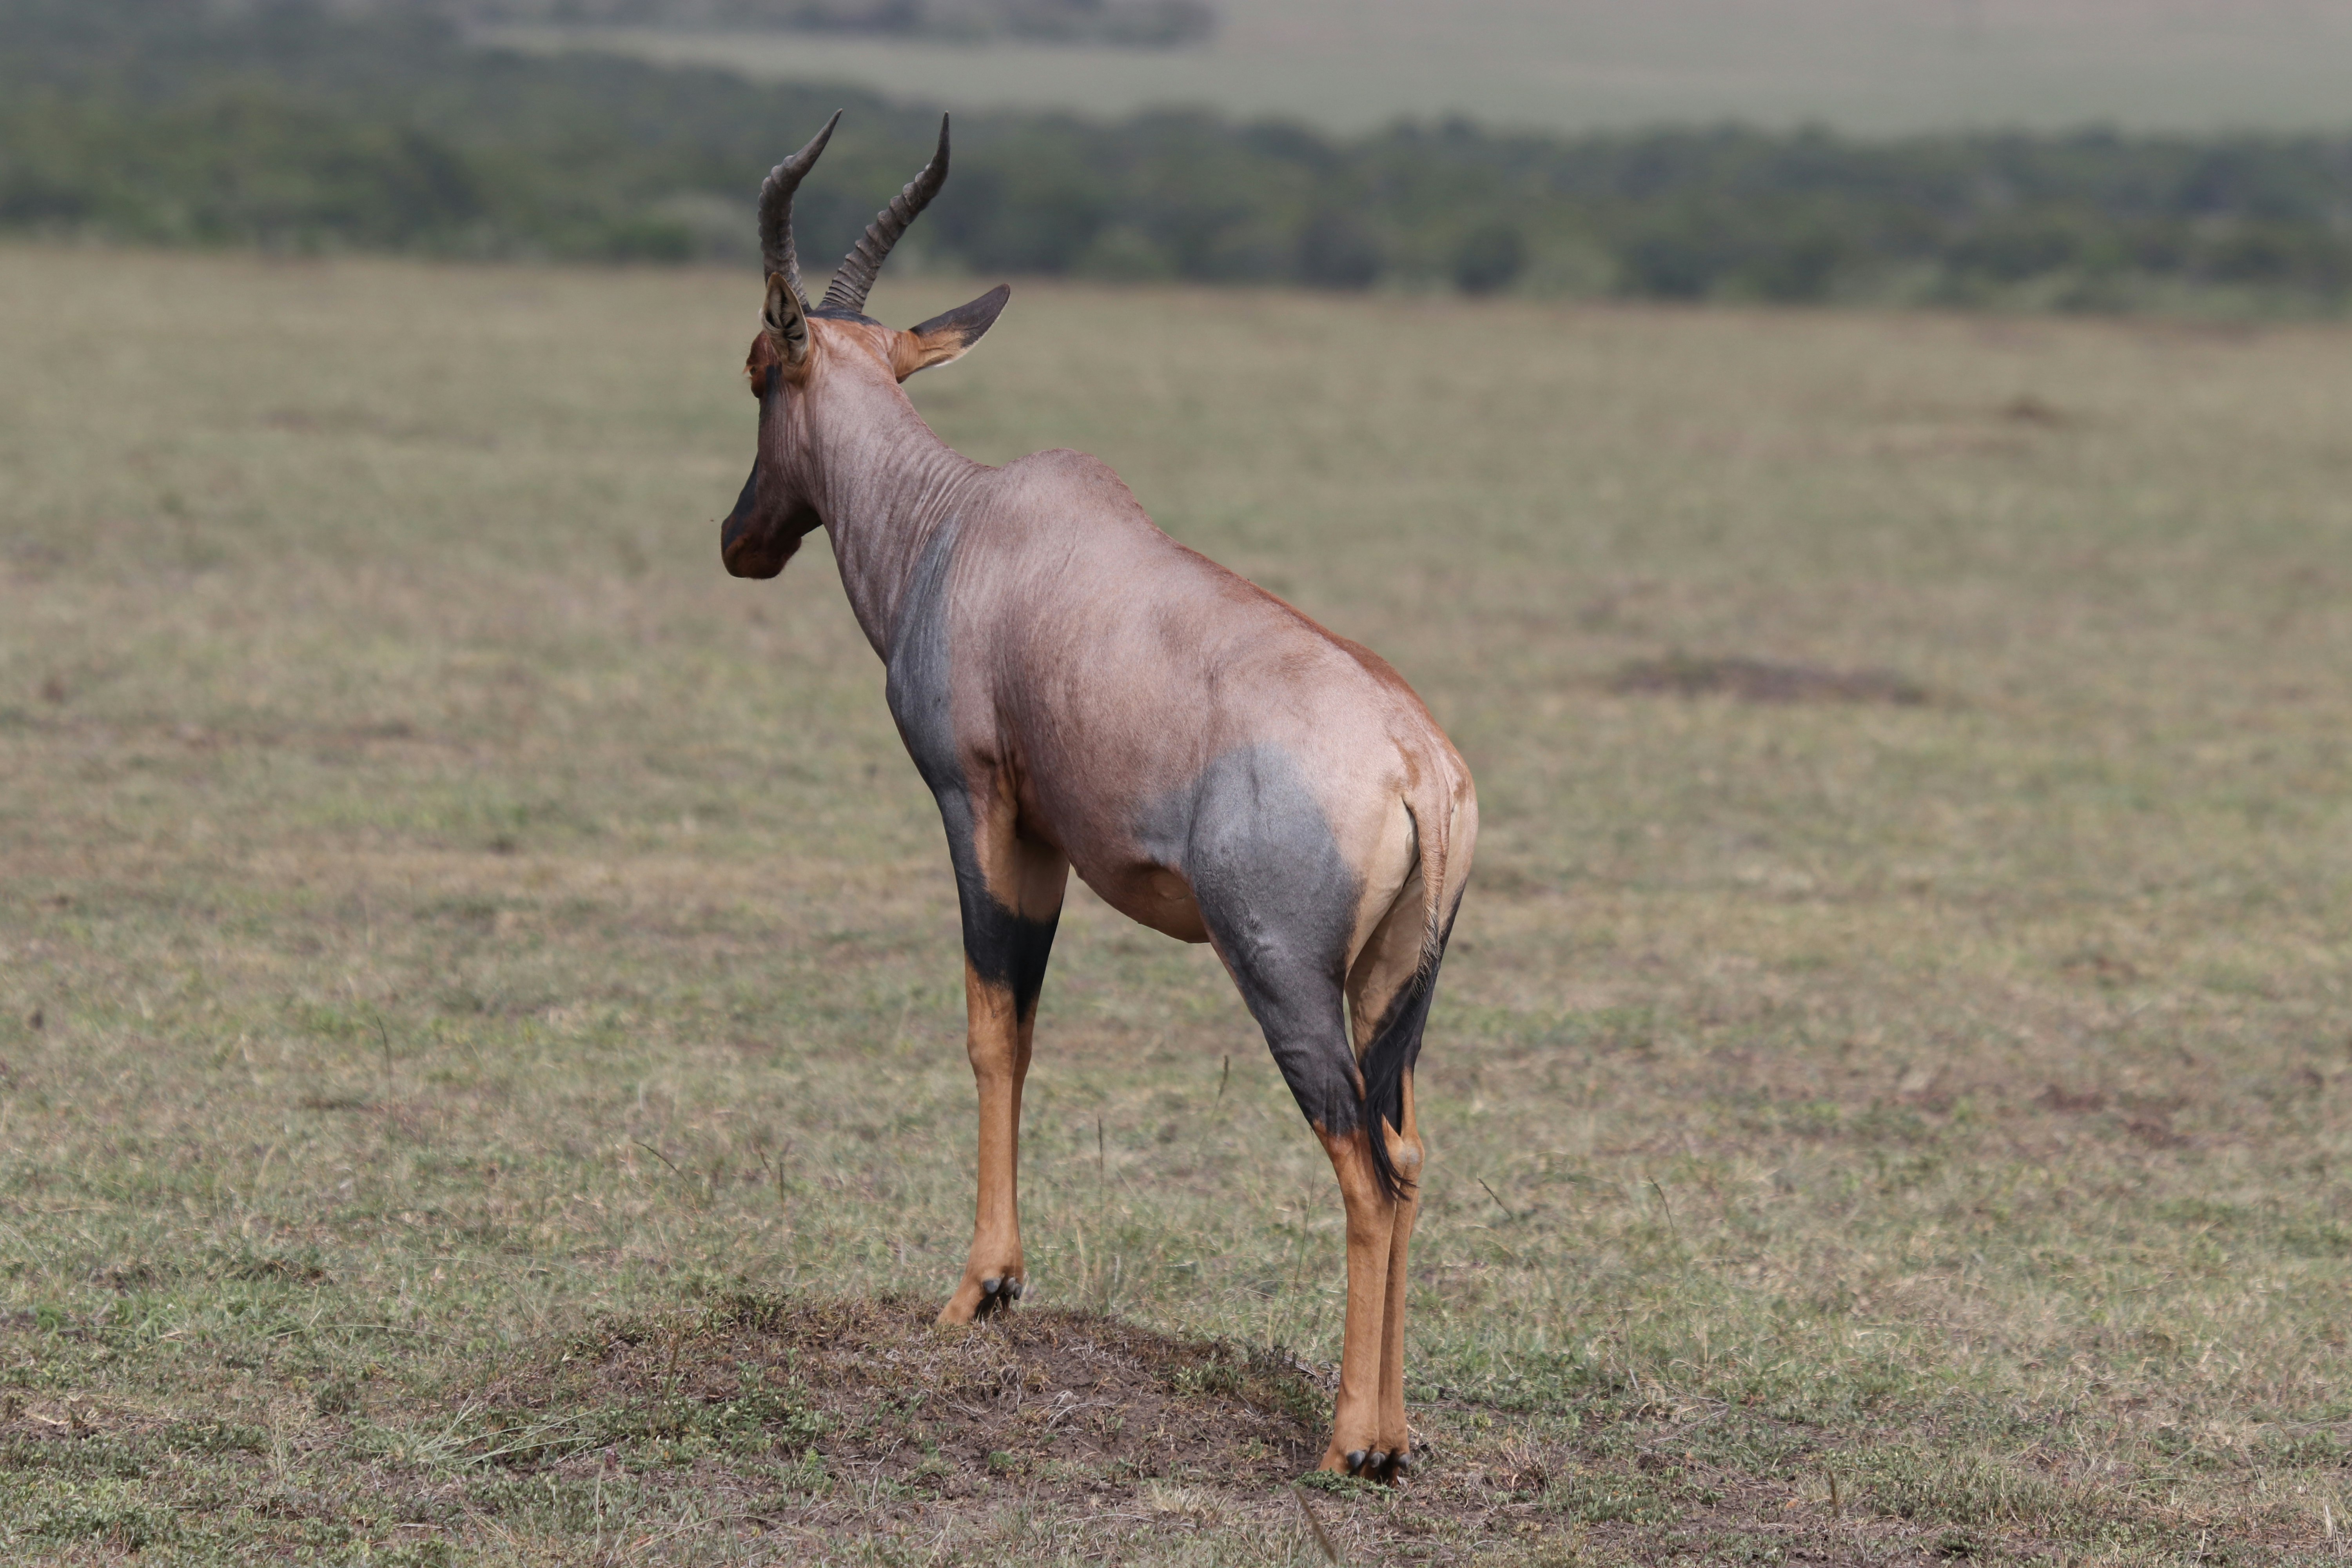 Topi antelope (also called yellow socks and blue jeans, because of the colors on the legs) in Masai Mara, Kenya. 